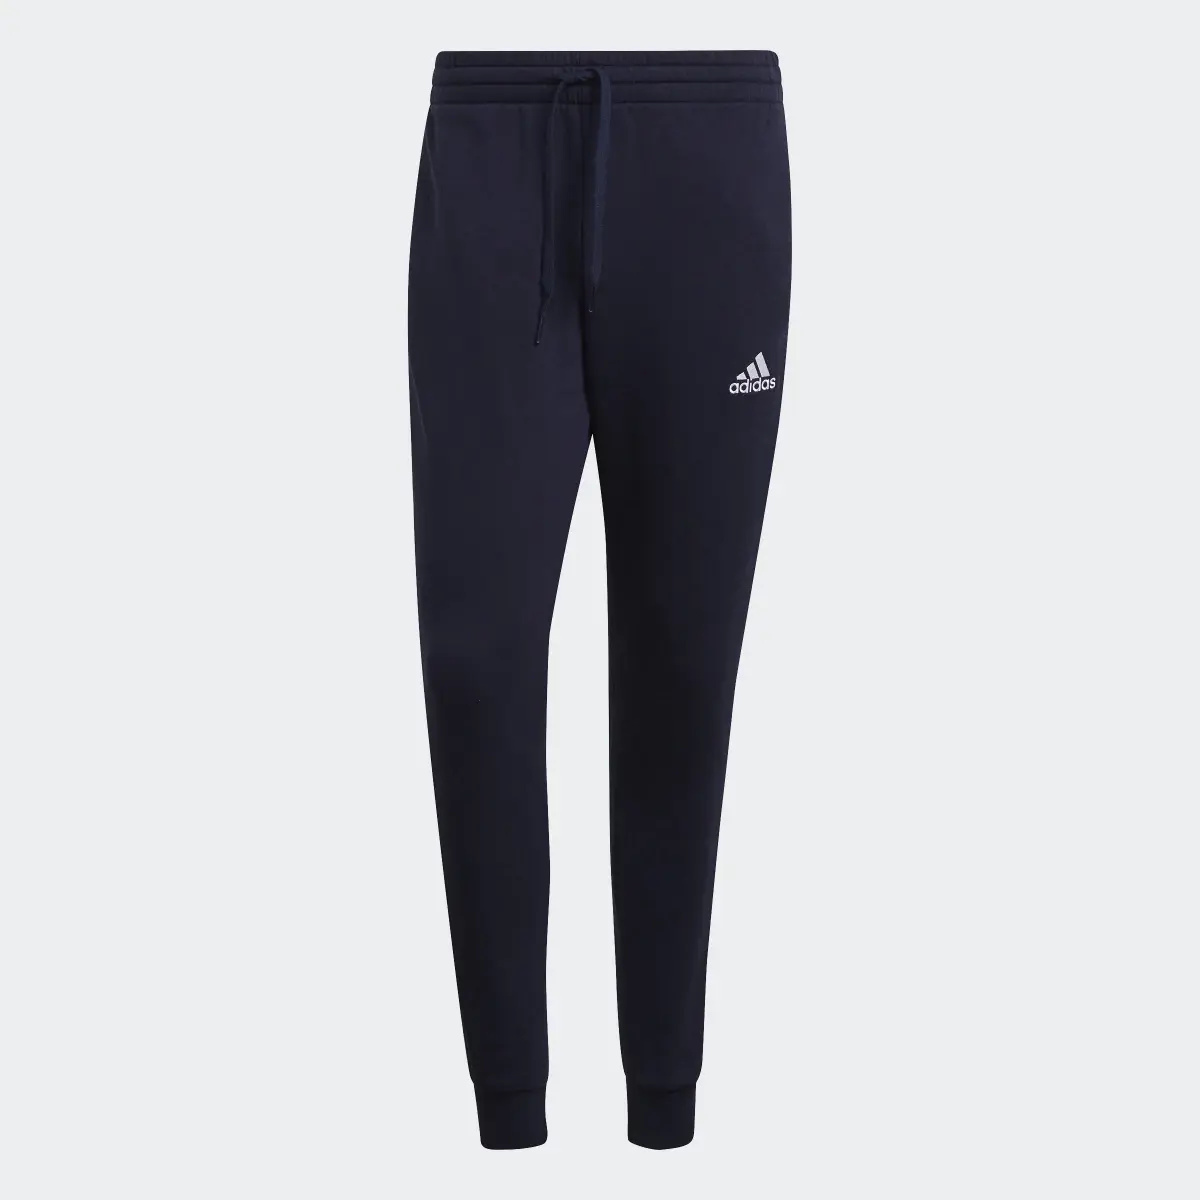 Adidas Essentials Fleece Fitted 3-Stripes Pants. 1